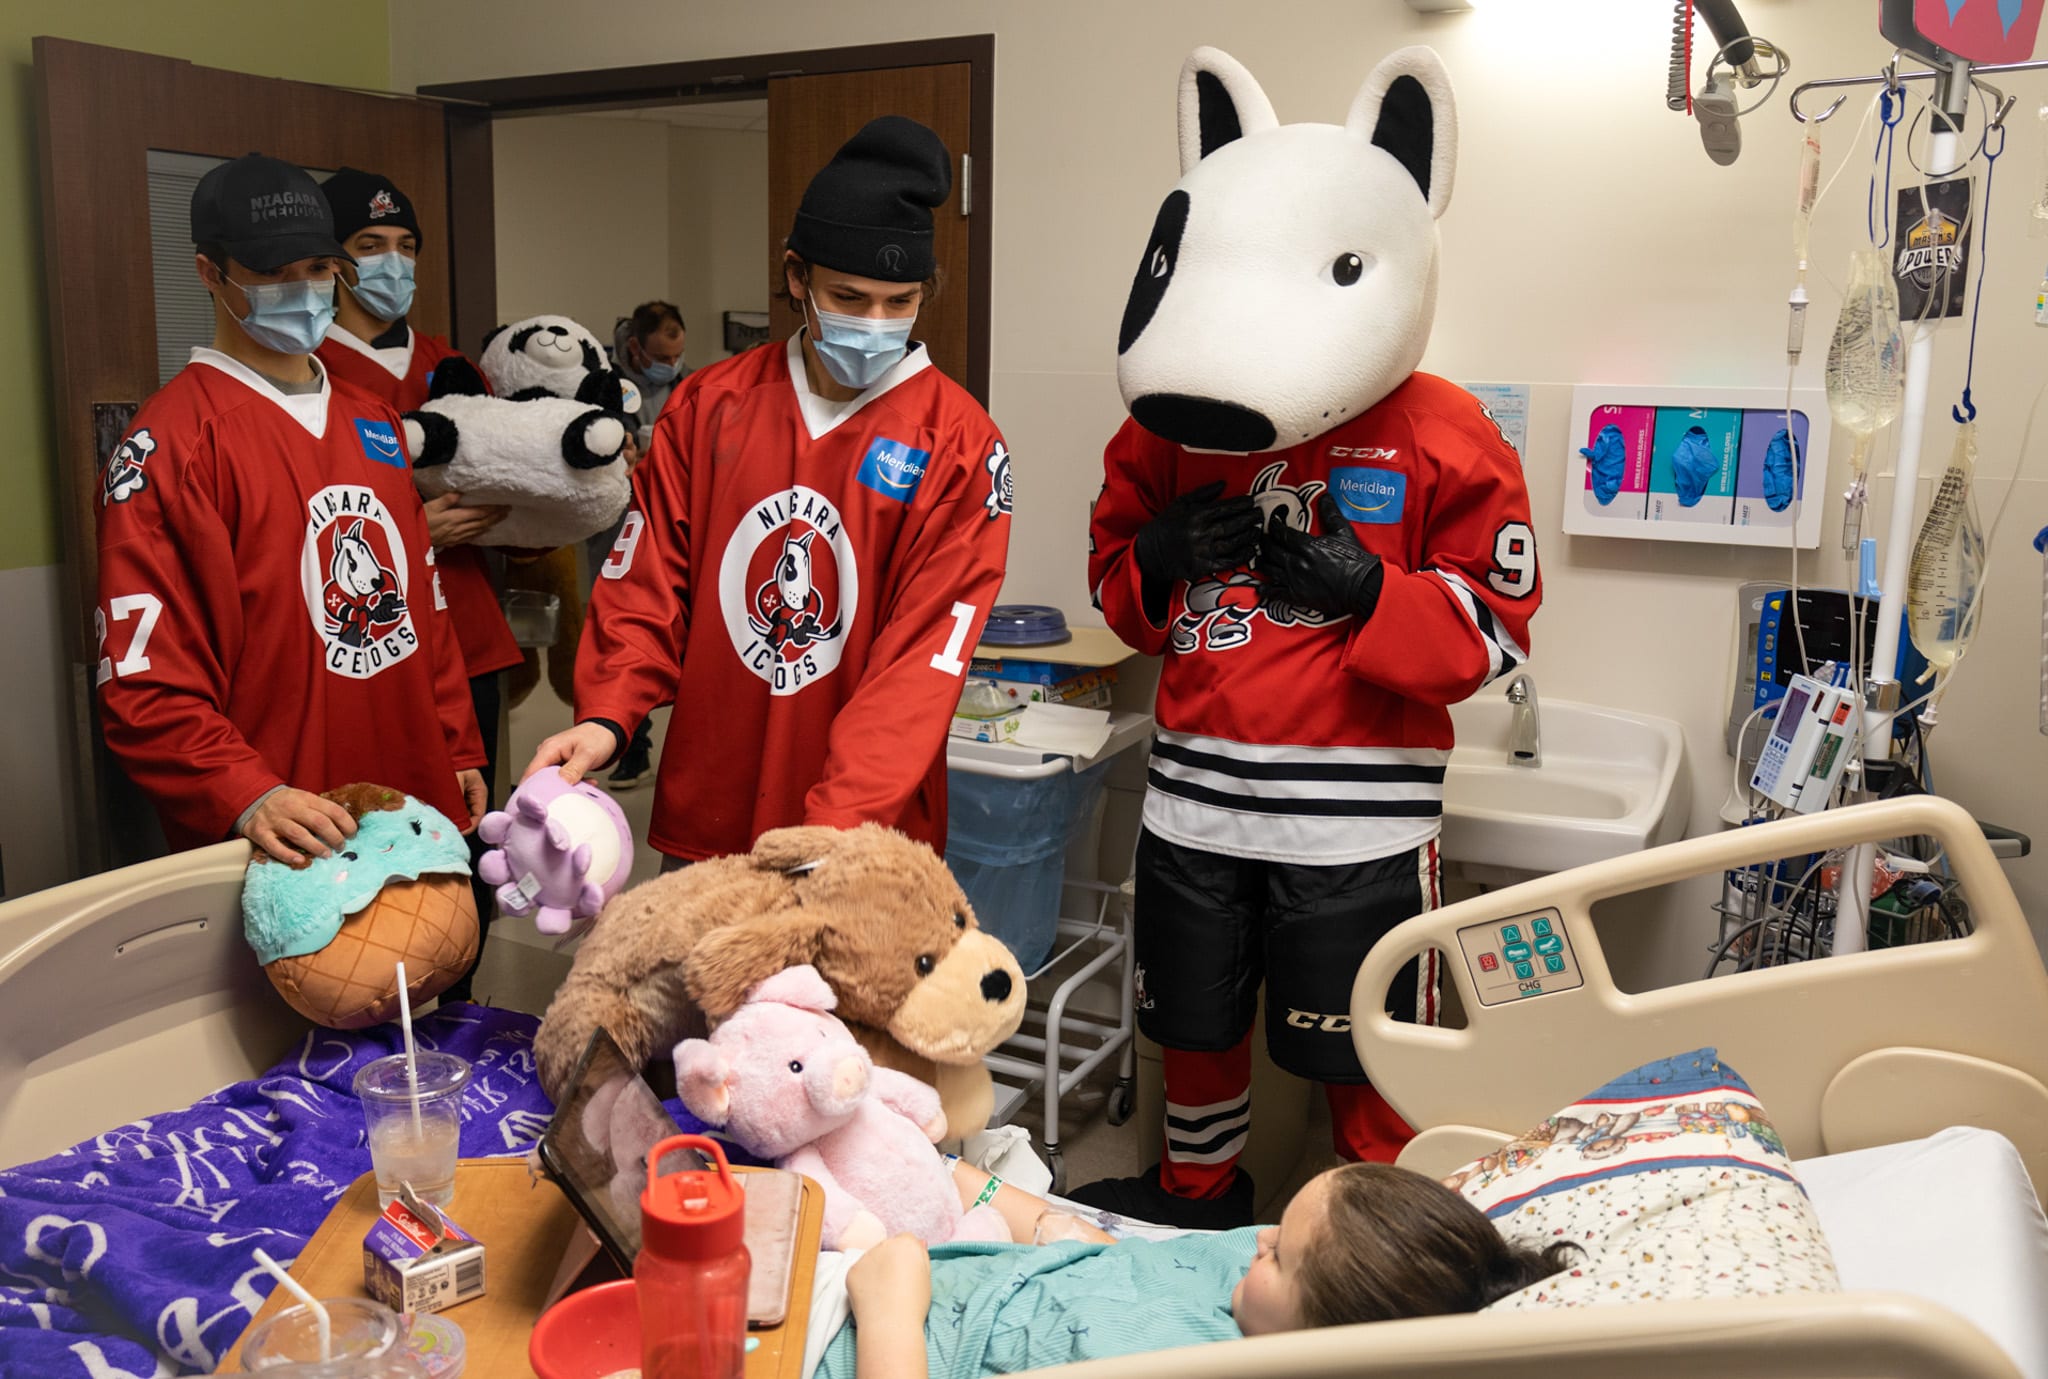 IceDogs players and mascot Bones deliver toys to a patient in a hospital bed